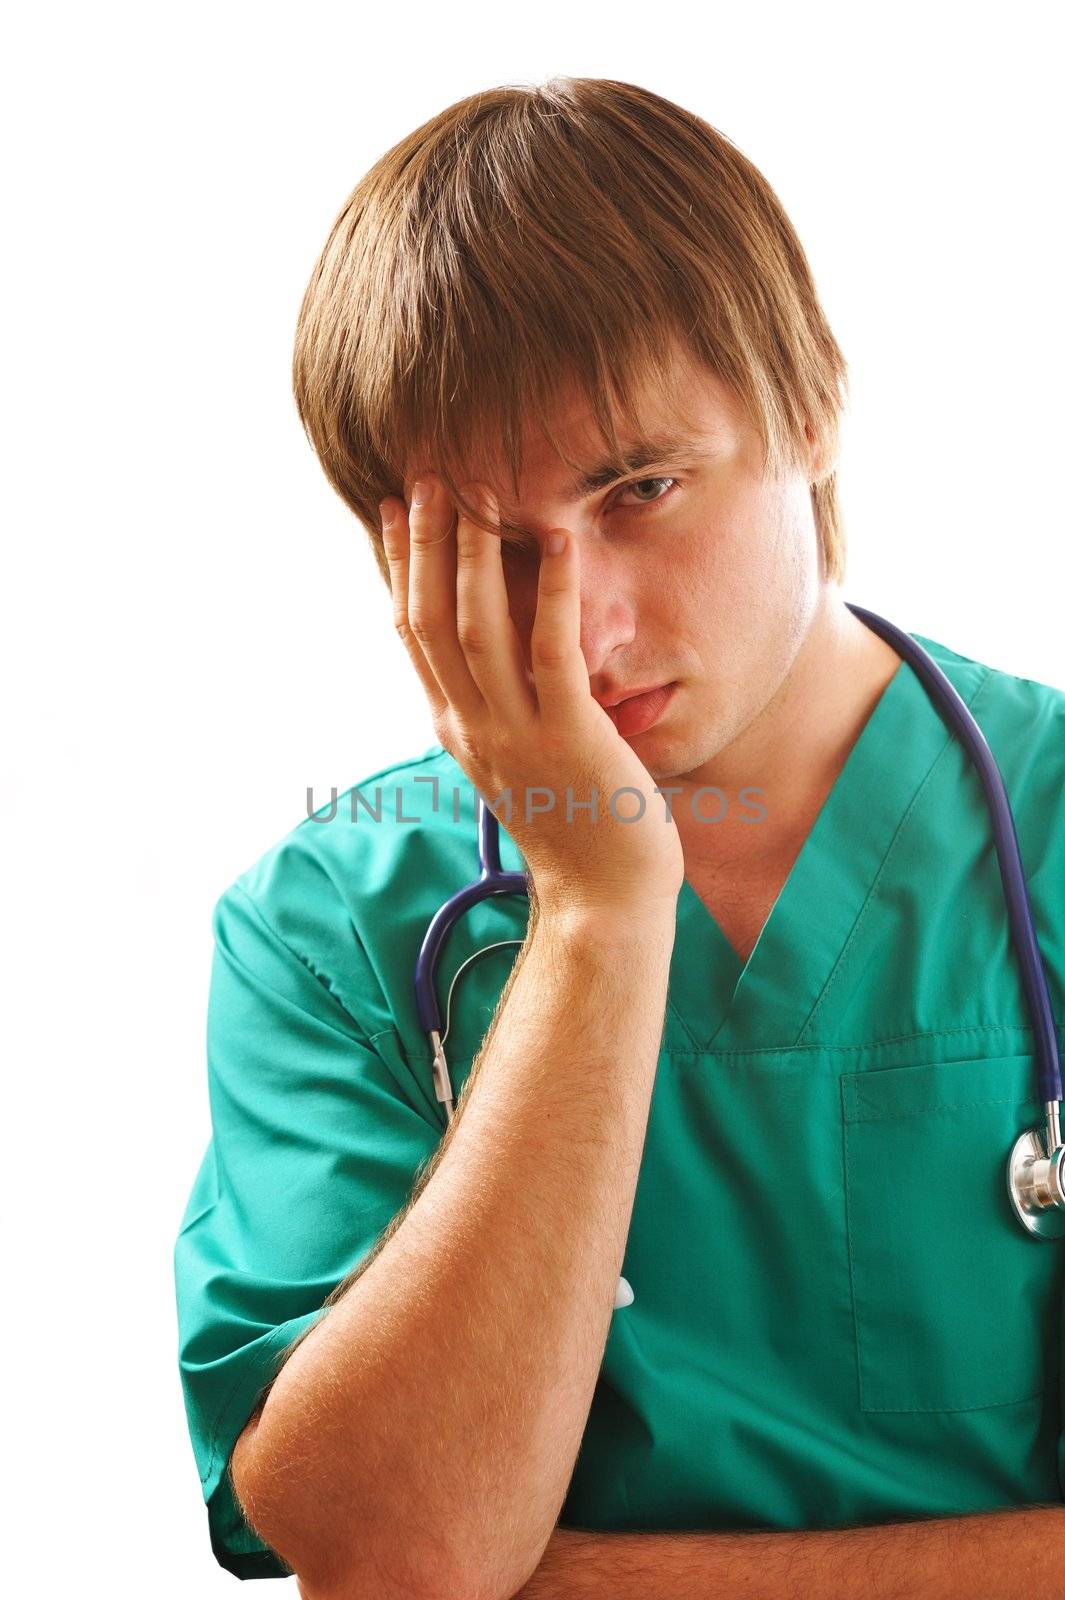 Unhappy tired doctor, bad news may be.